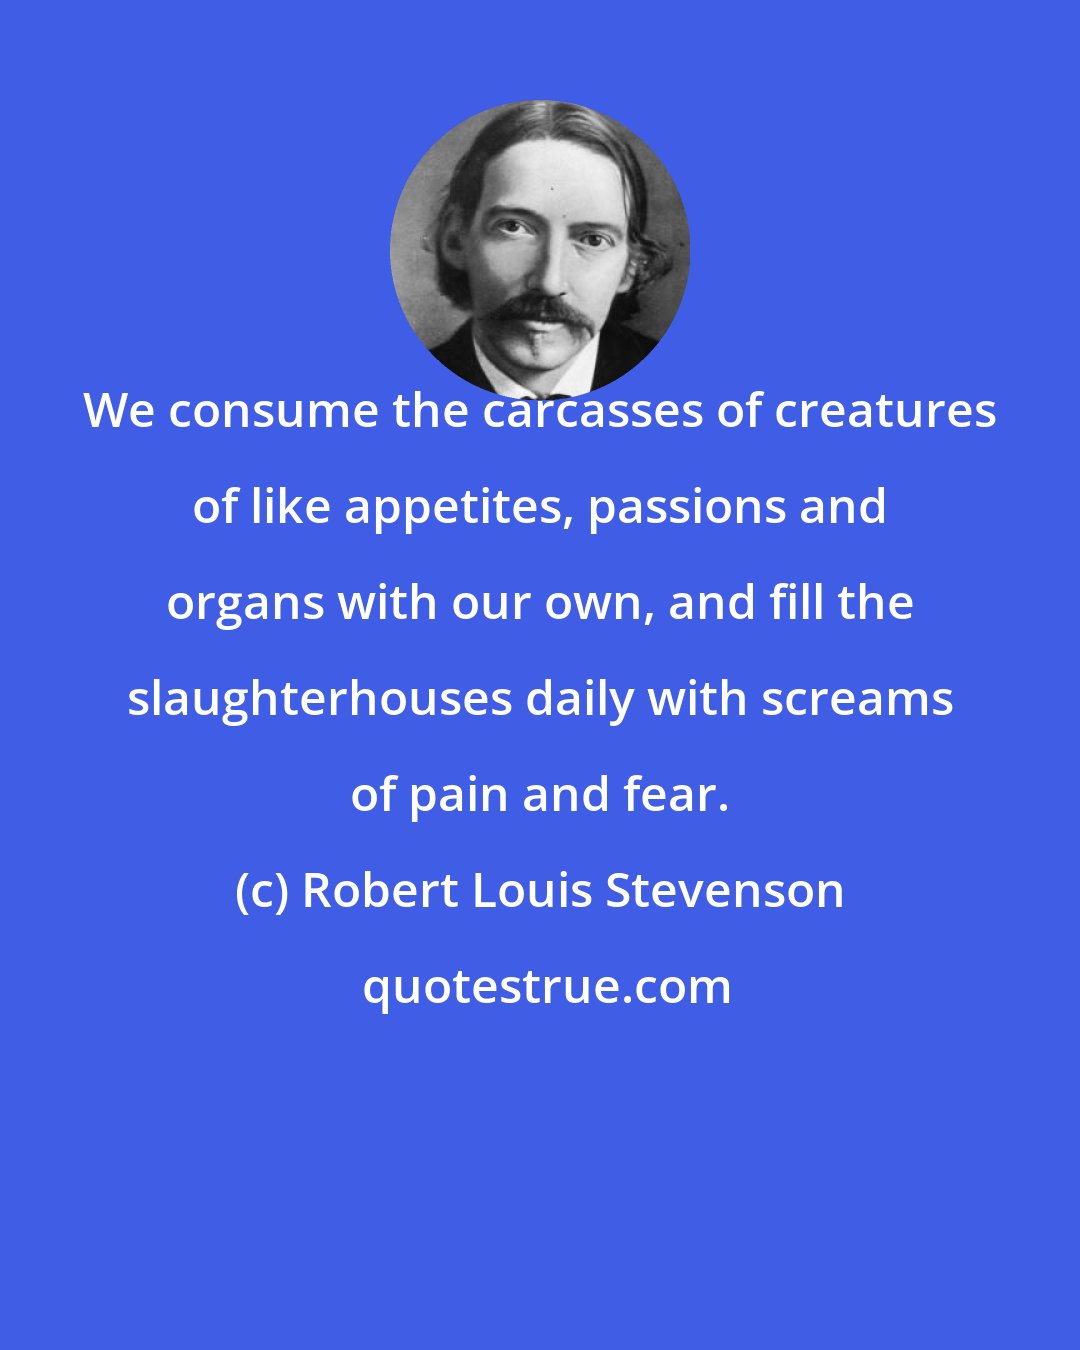 Robert Louis Stevenson: We consume the carcasses of creatures of like appetites, passions and organs with our own, and fill the slaughterhouses daily with screams of pain and fear.